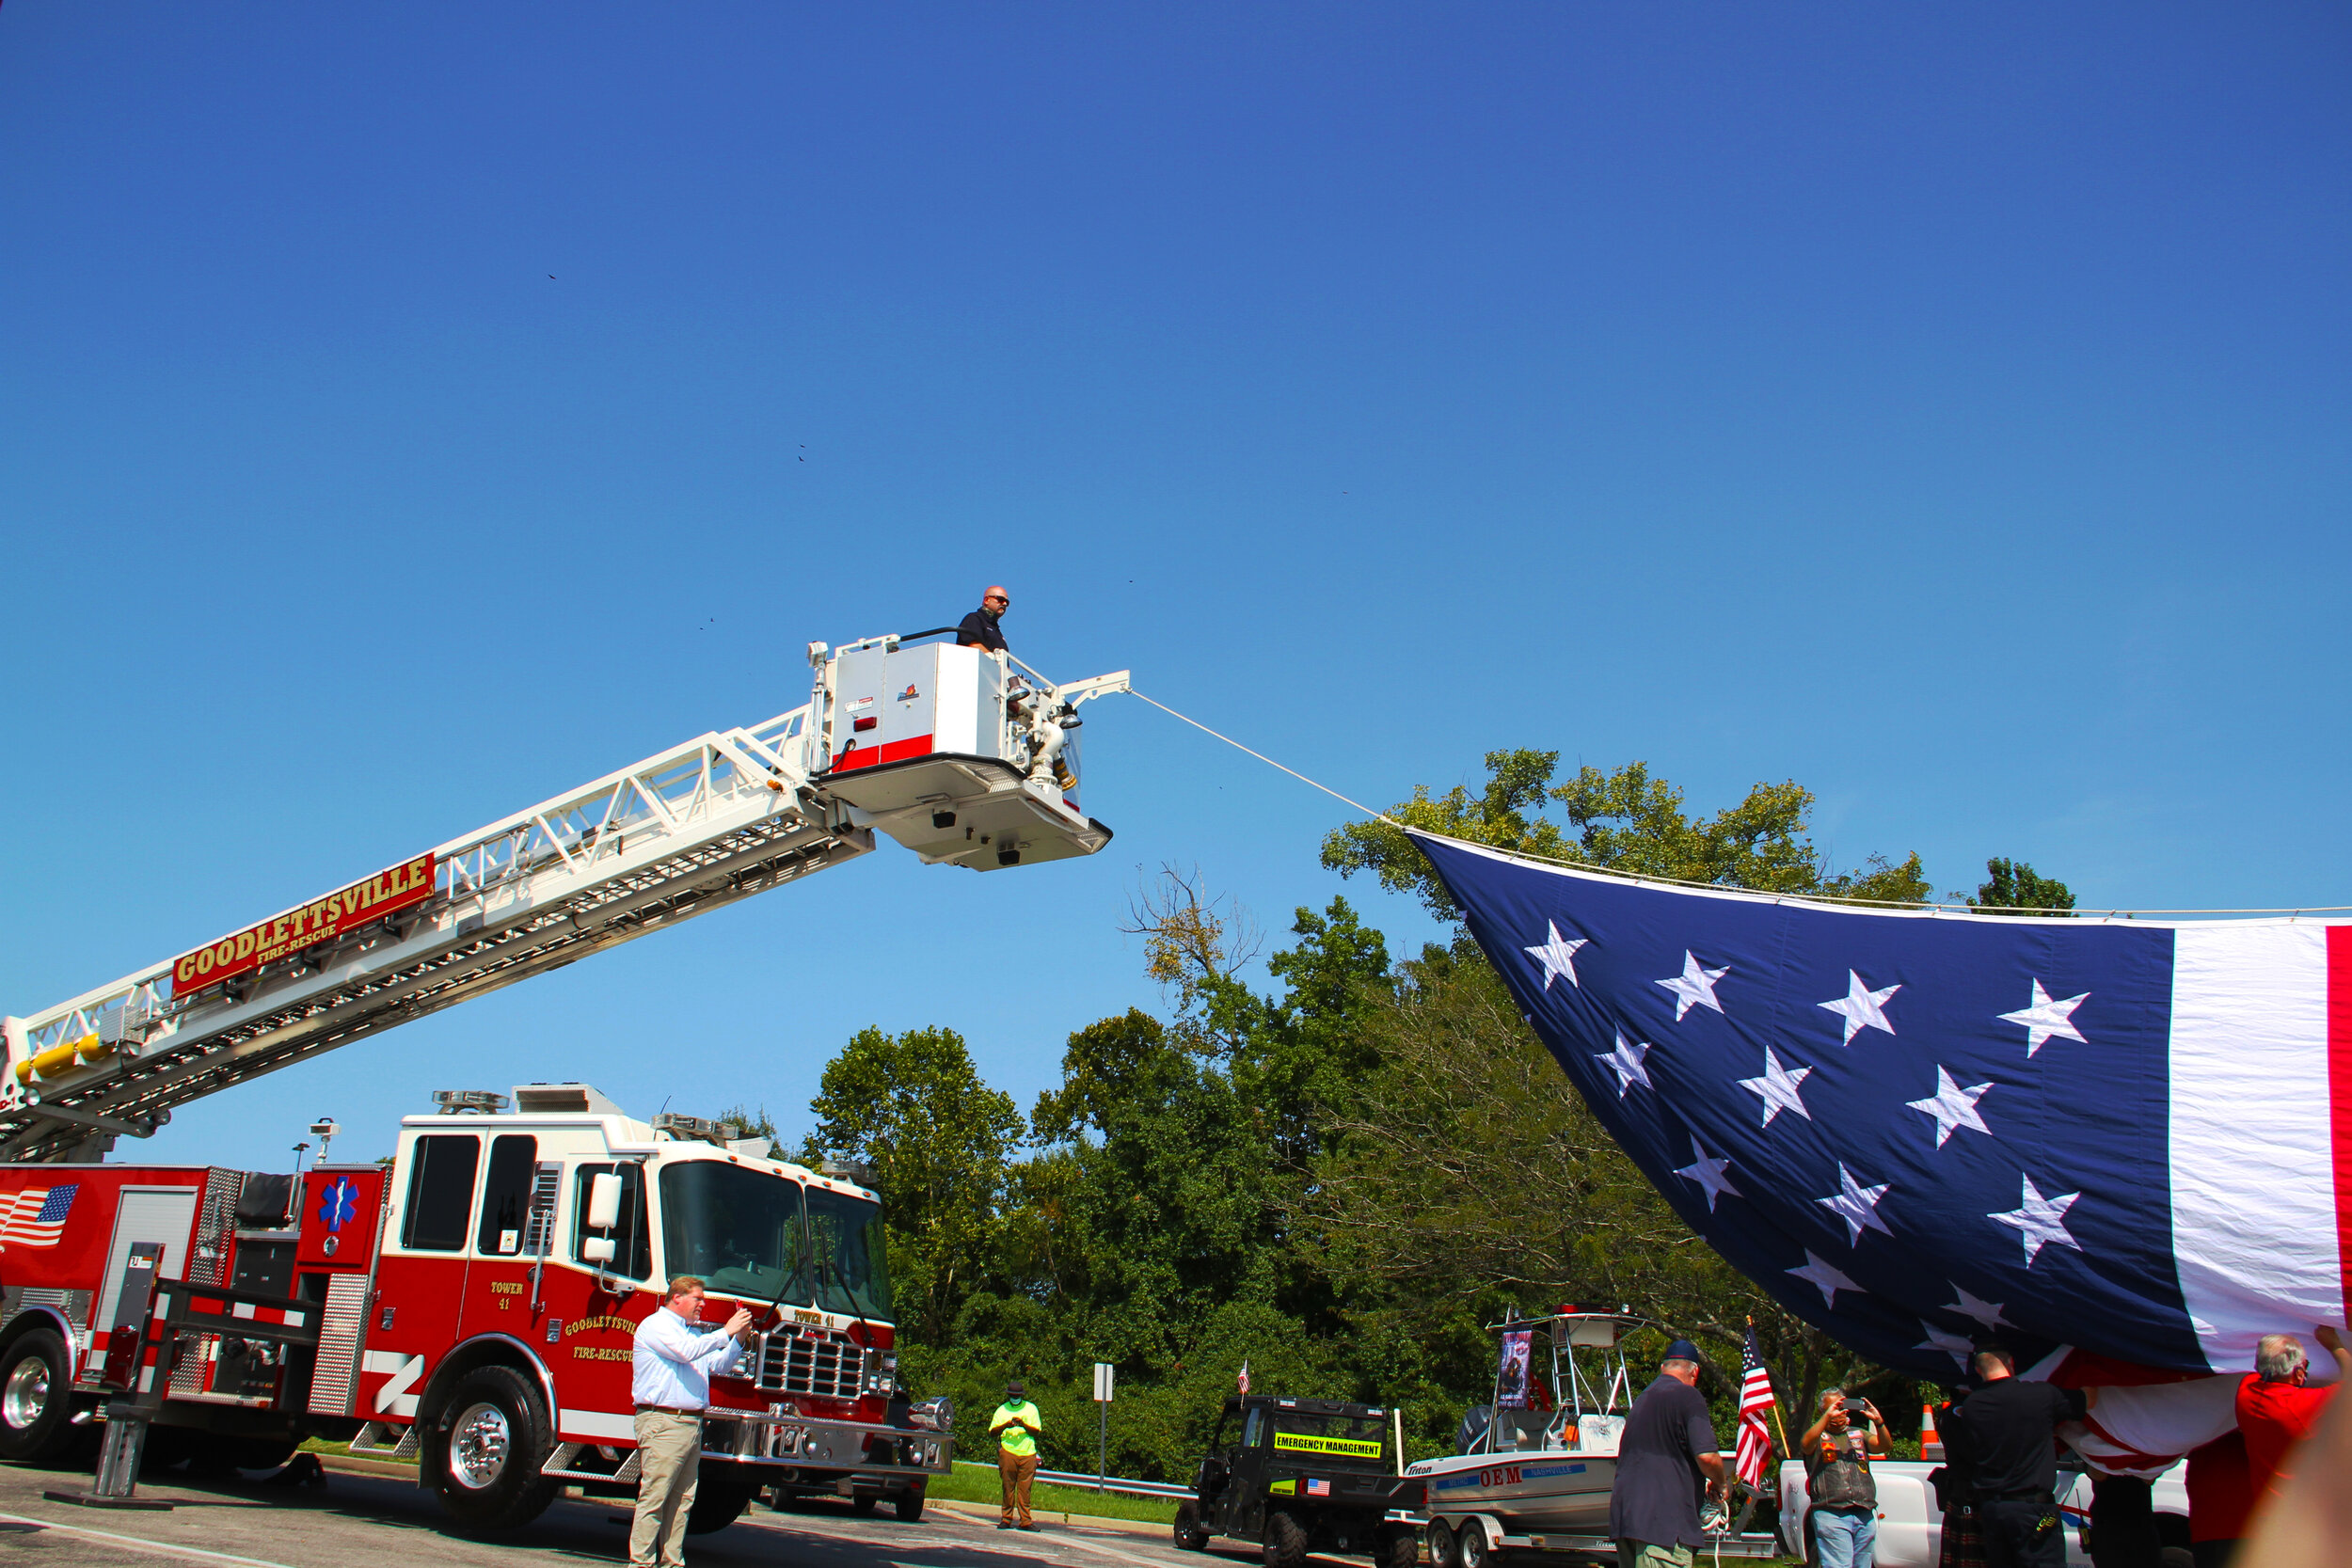  2020 9/11 Tribute Mission BBQ Nashville – 9/11 REMEMBERED 2020 – Photo: Cierra Mazzola – All Rights Reserved  